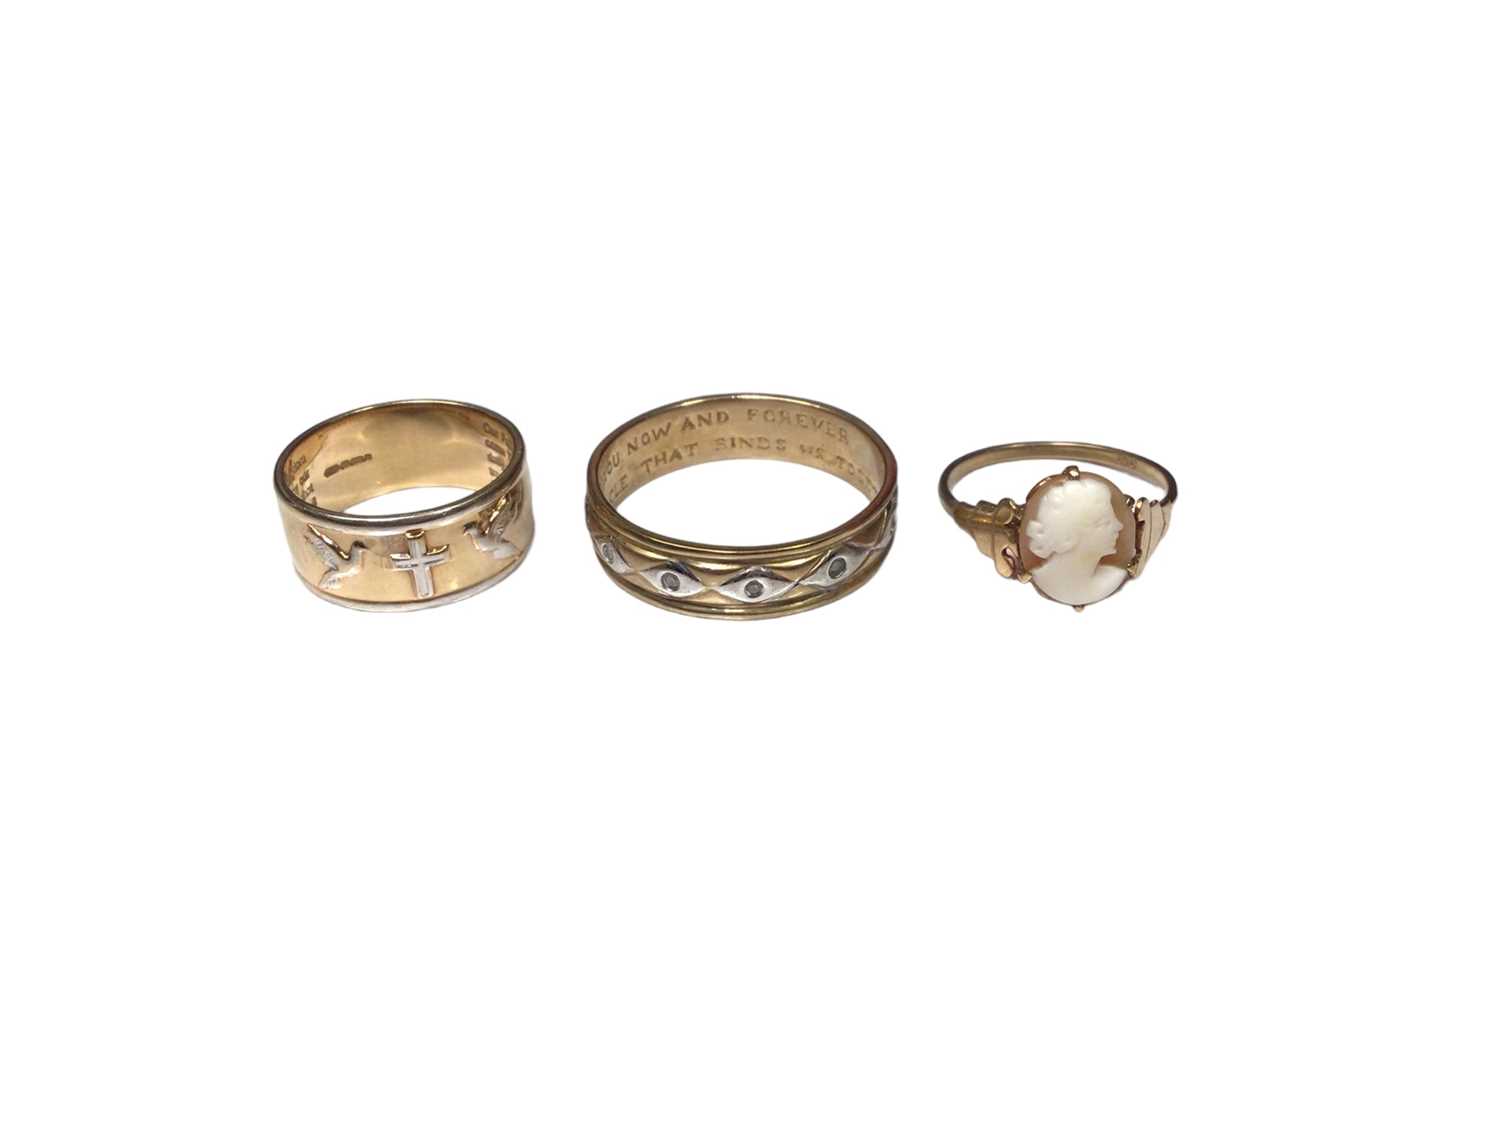 Lot 179 - 9ct gold cameo ring, 9ct gold wedding ring and 9ct yellow and white gold diamond set eternity style ring